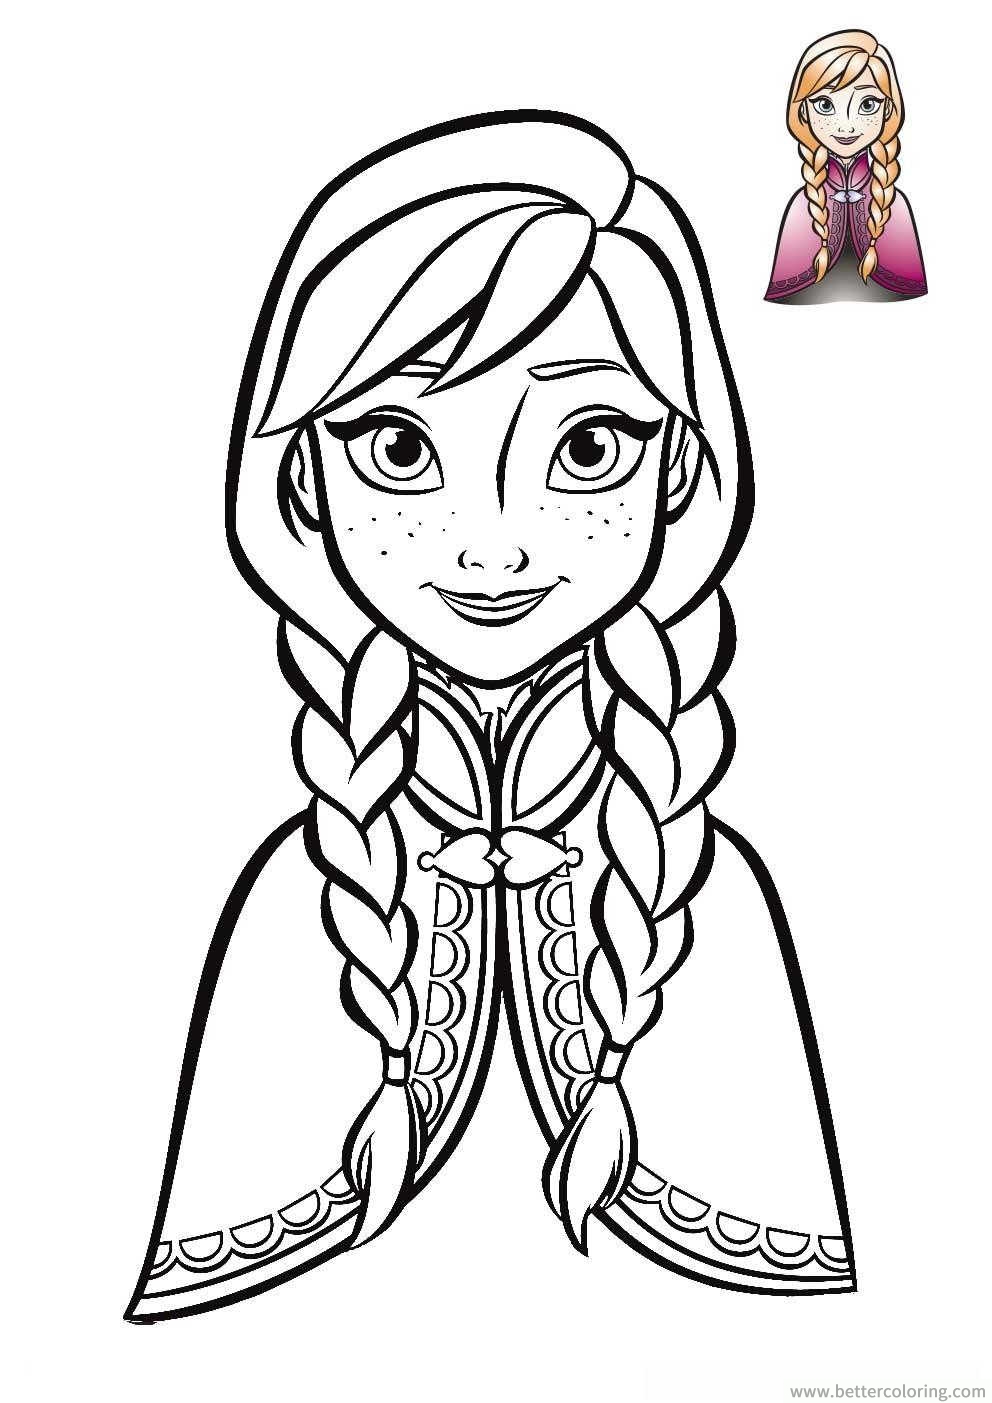 Disney Anna Frozen Face 2018 Coloring Pages Printable for Kids Free